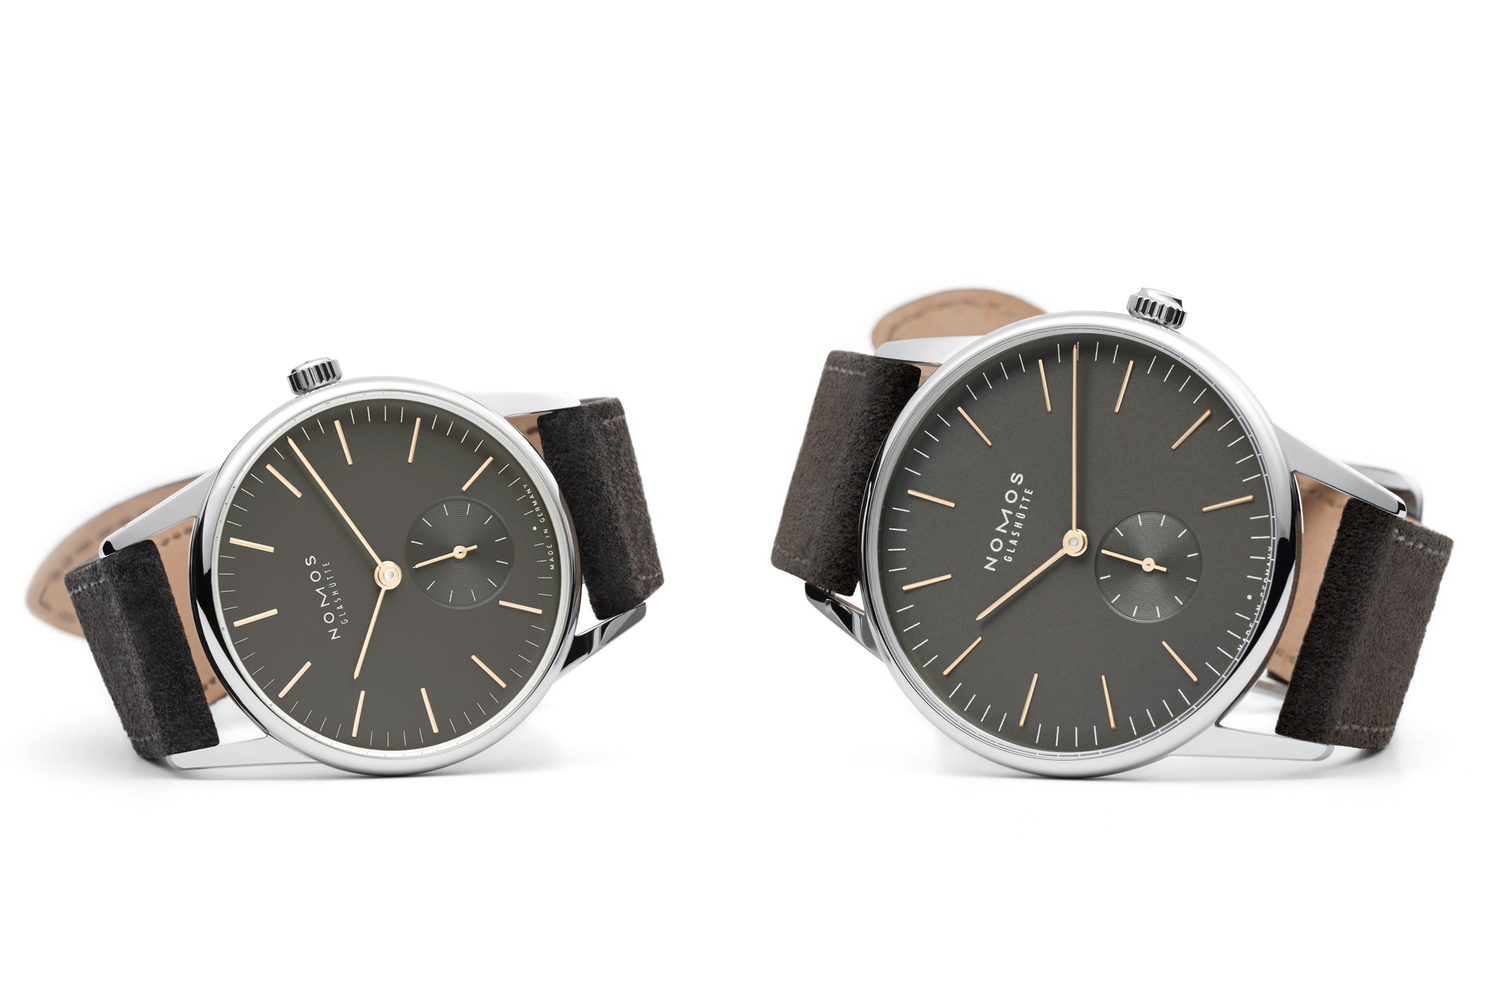 Introducing The Nomos Orion 1989, Celebrating The 25th